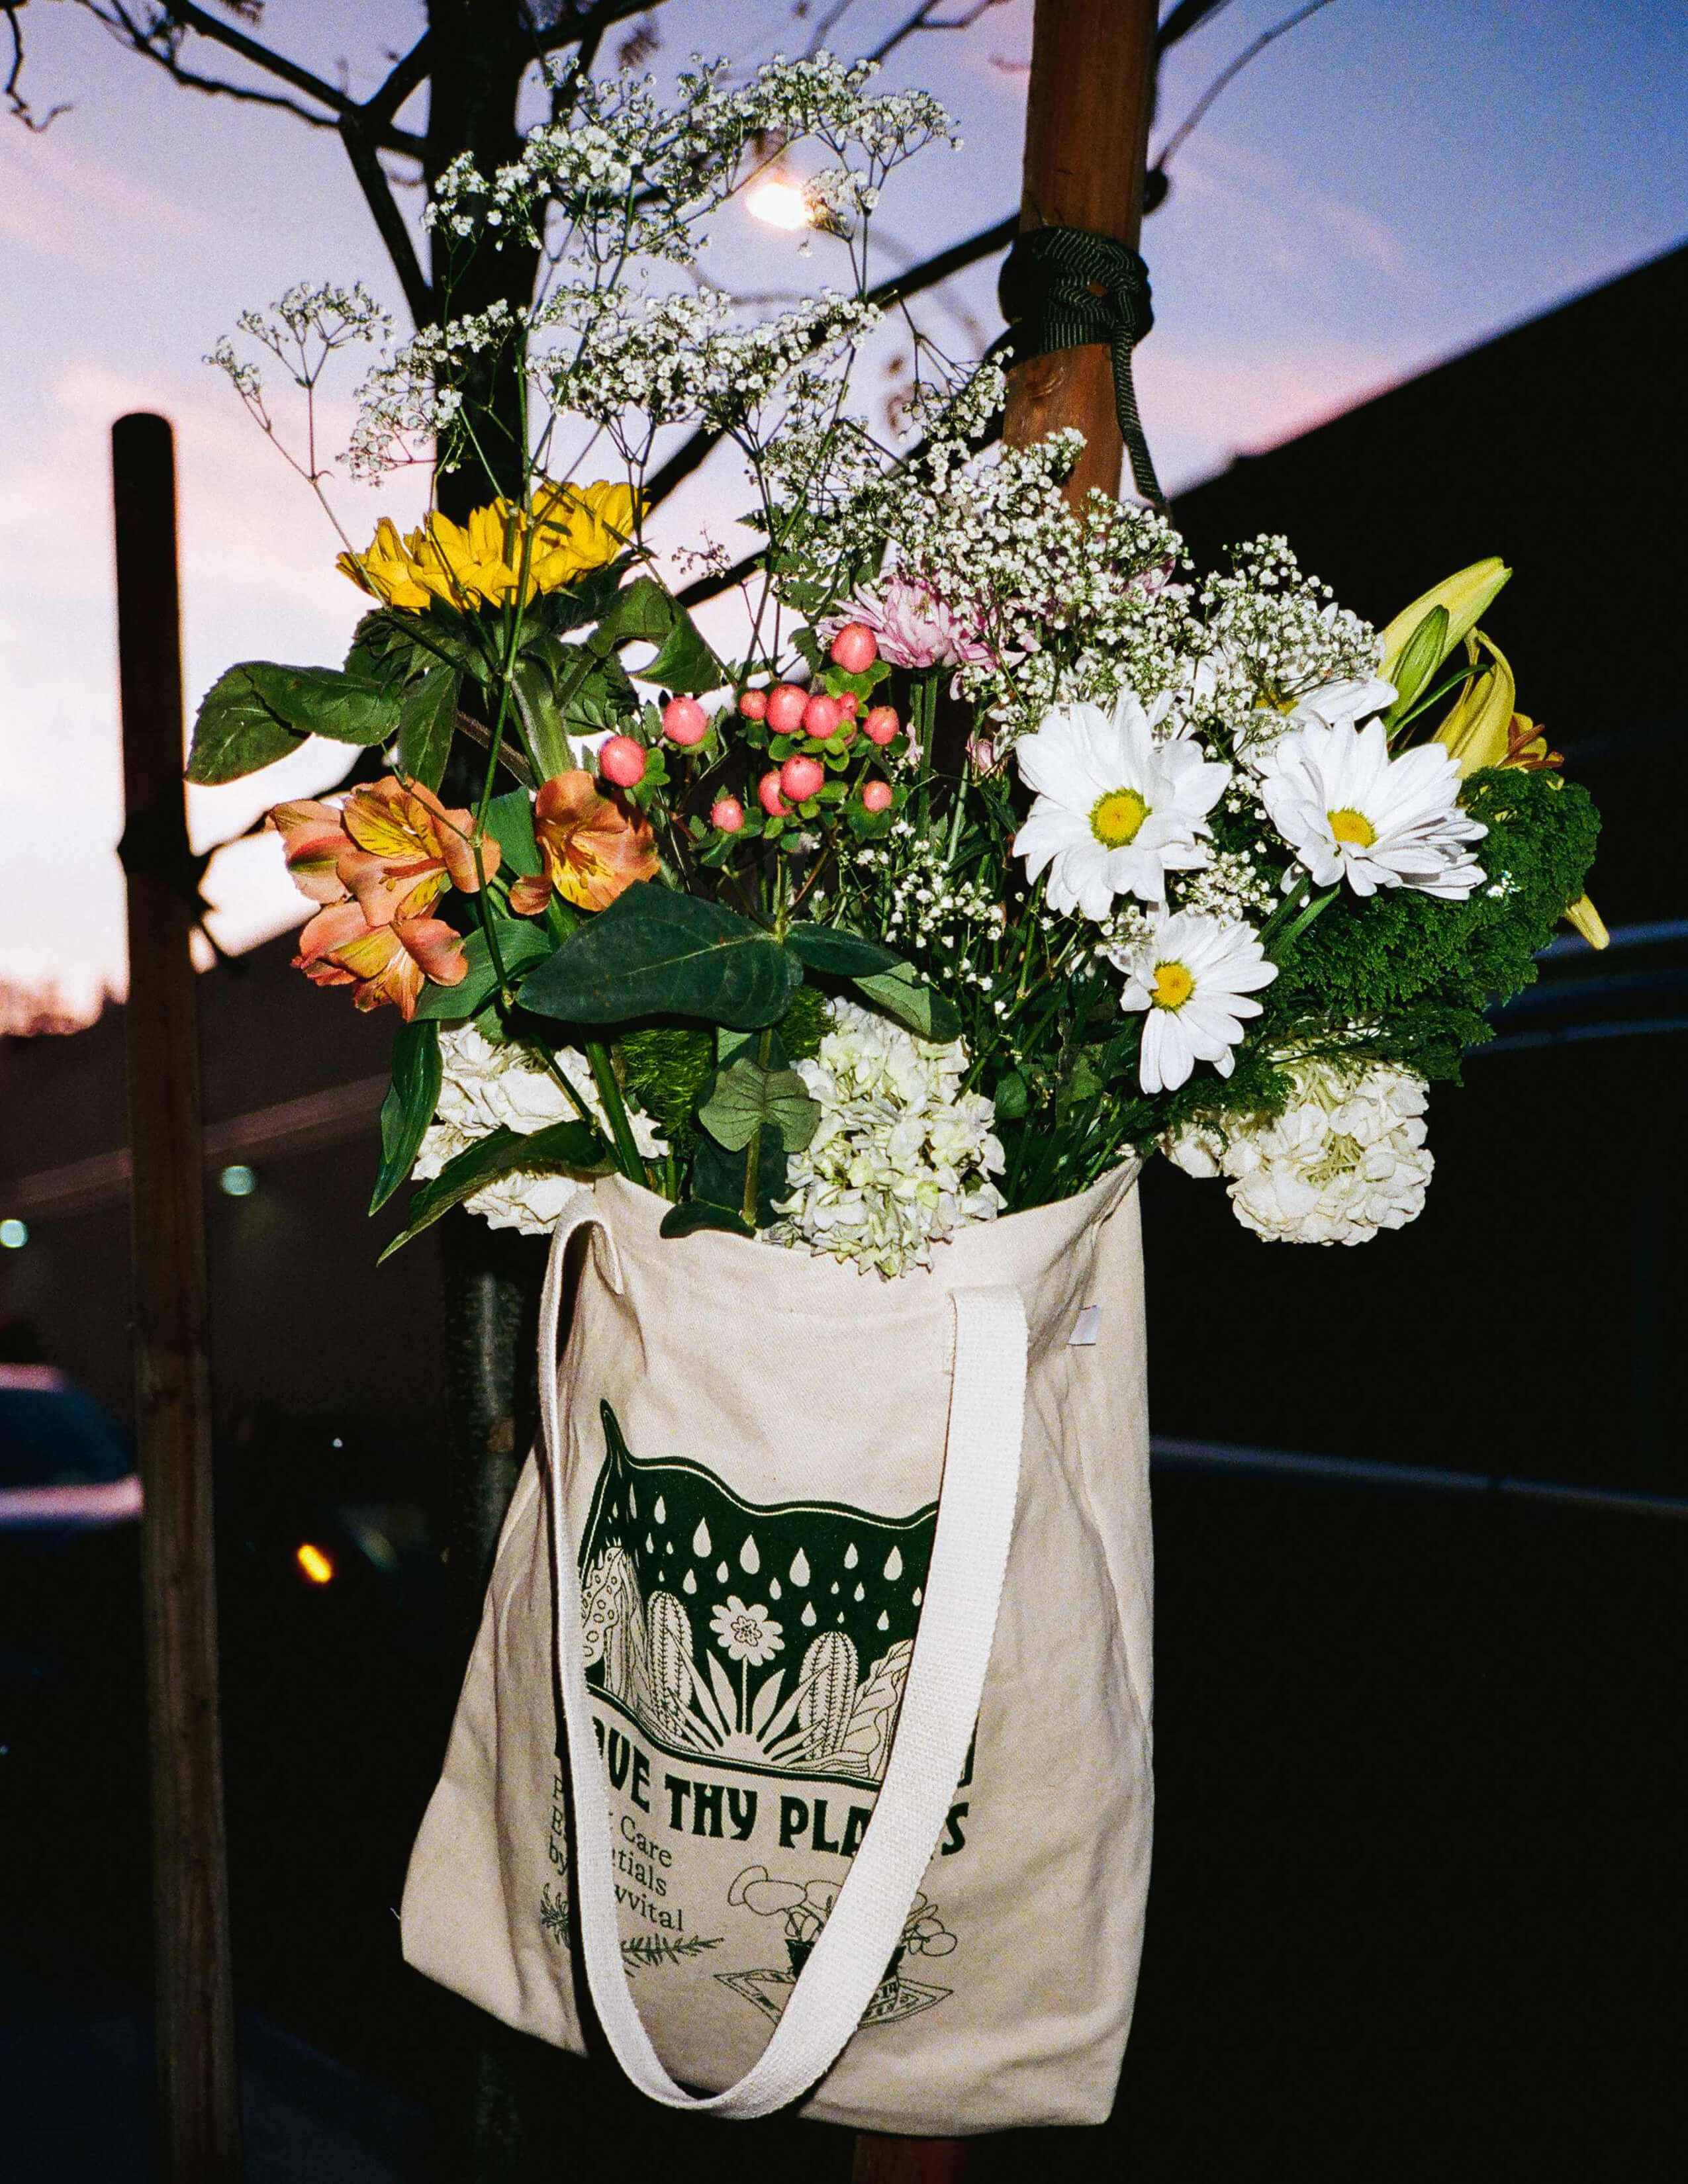 A collection of bouquets in the Sowvital - ‘Love Thy Plants’ tote bag hung on a stick.